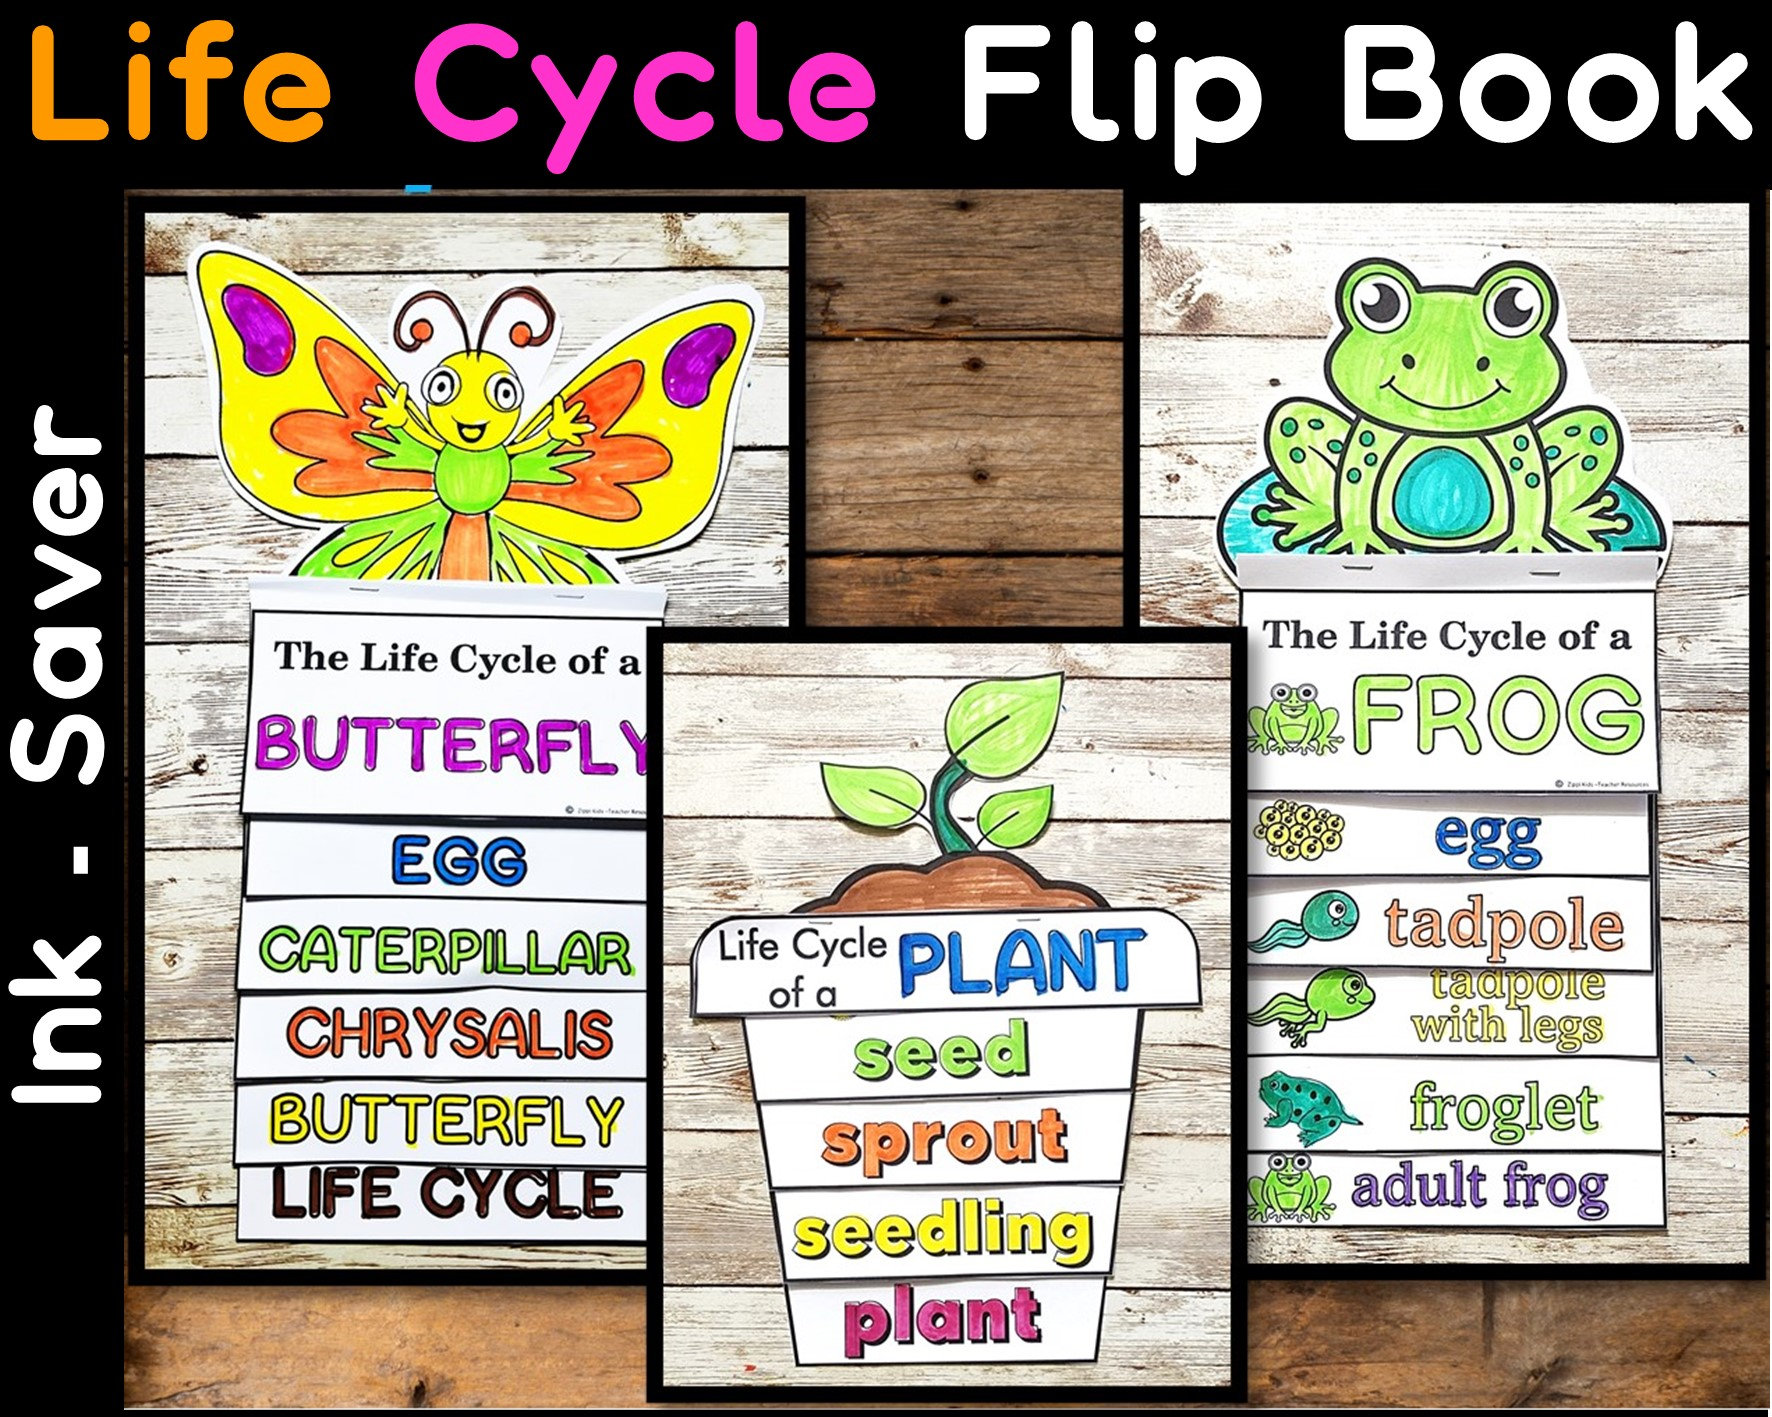 Life Cycle of a Spider Tab Flip book